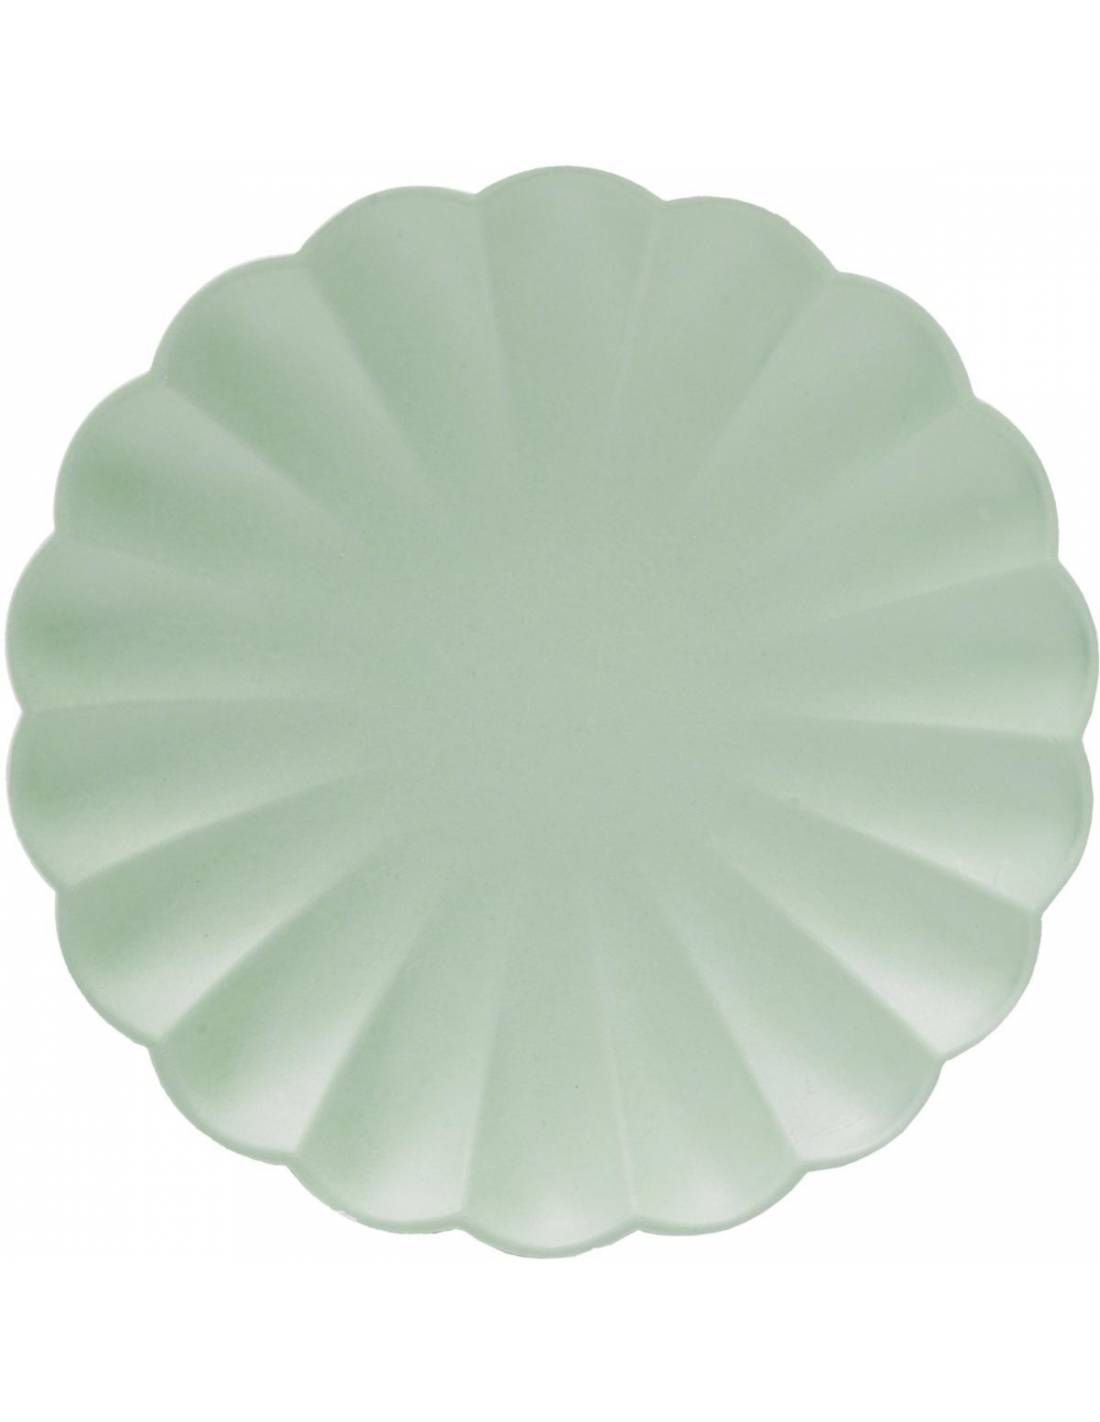 Mint basic eco compostable scalloped plate / 8 units.